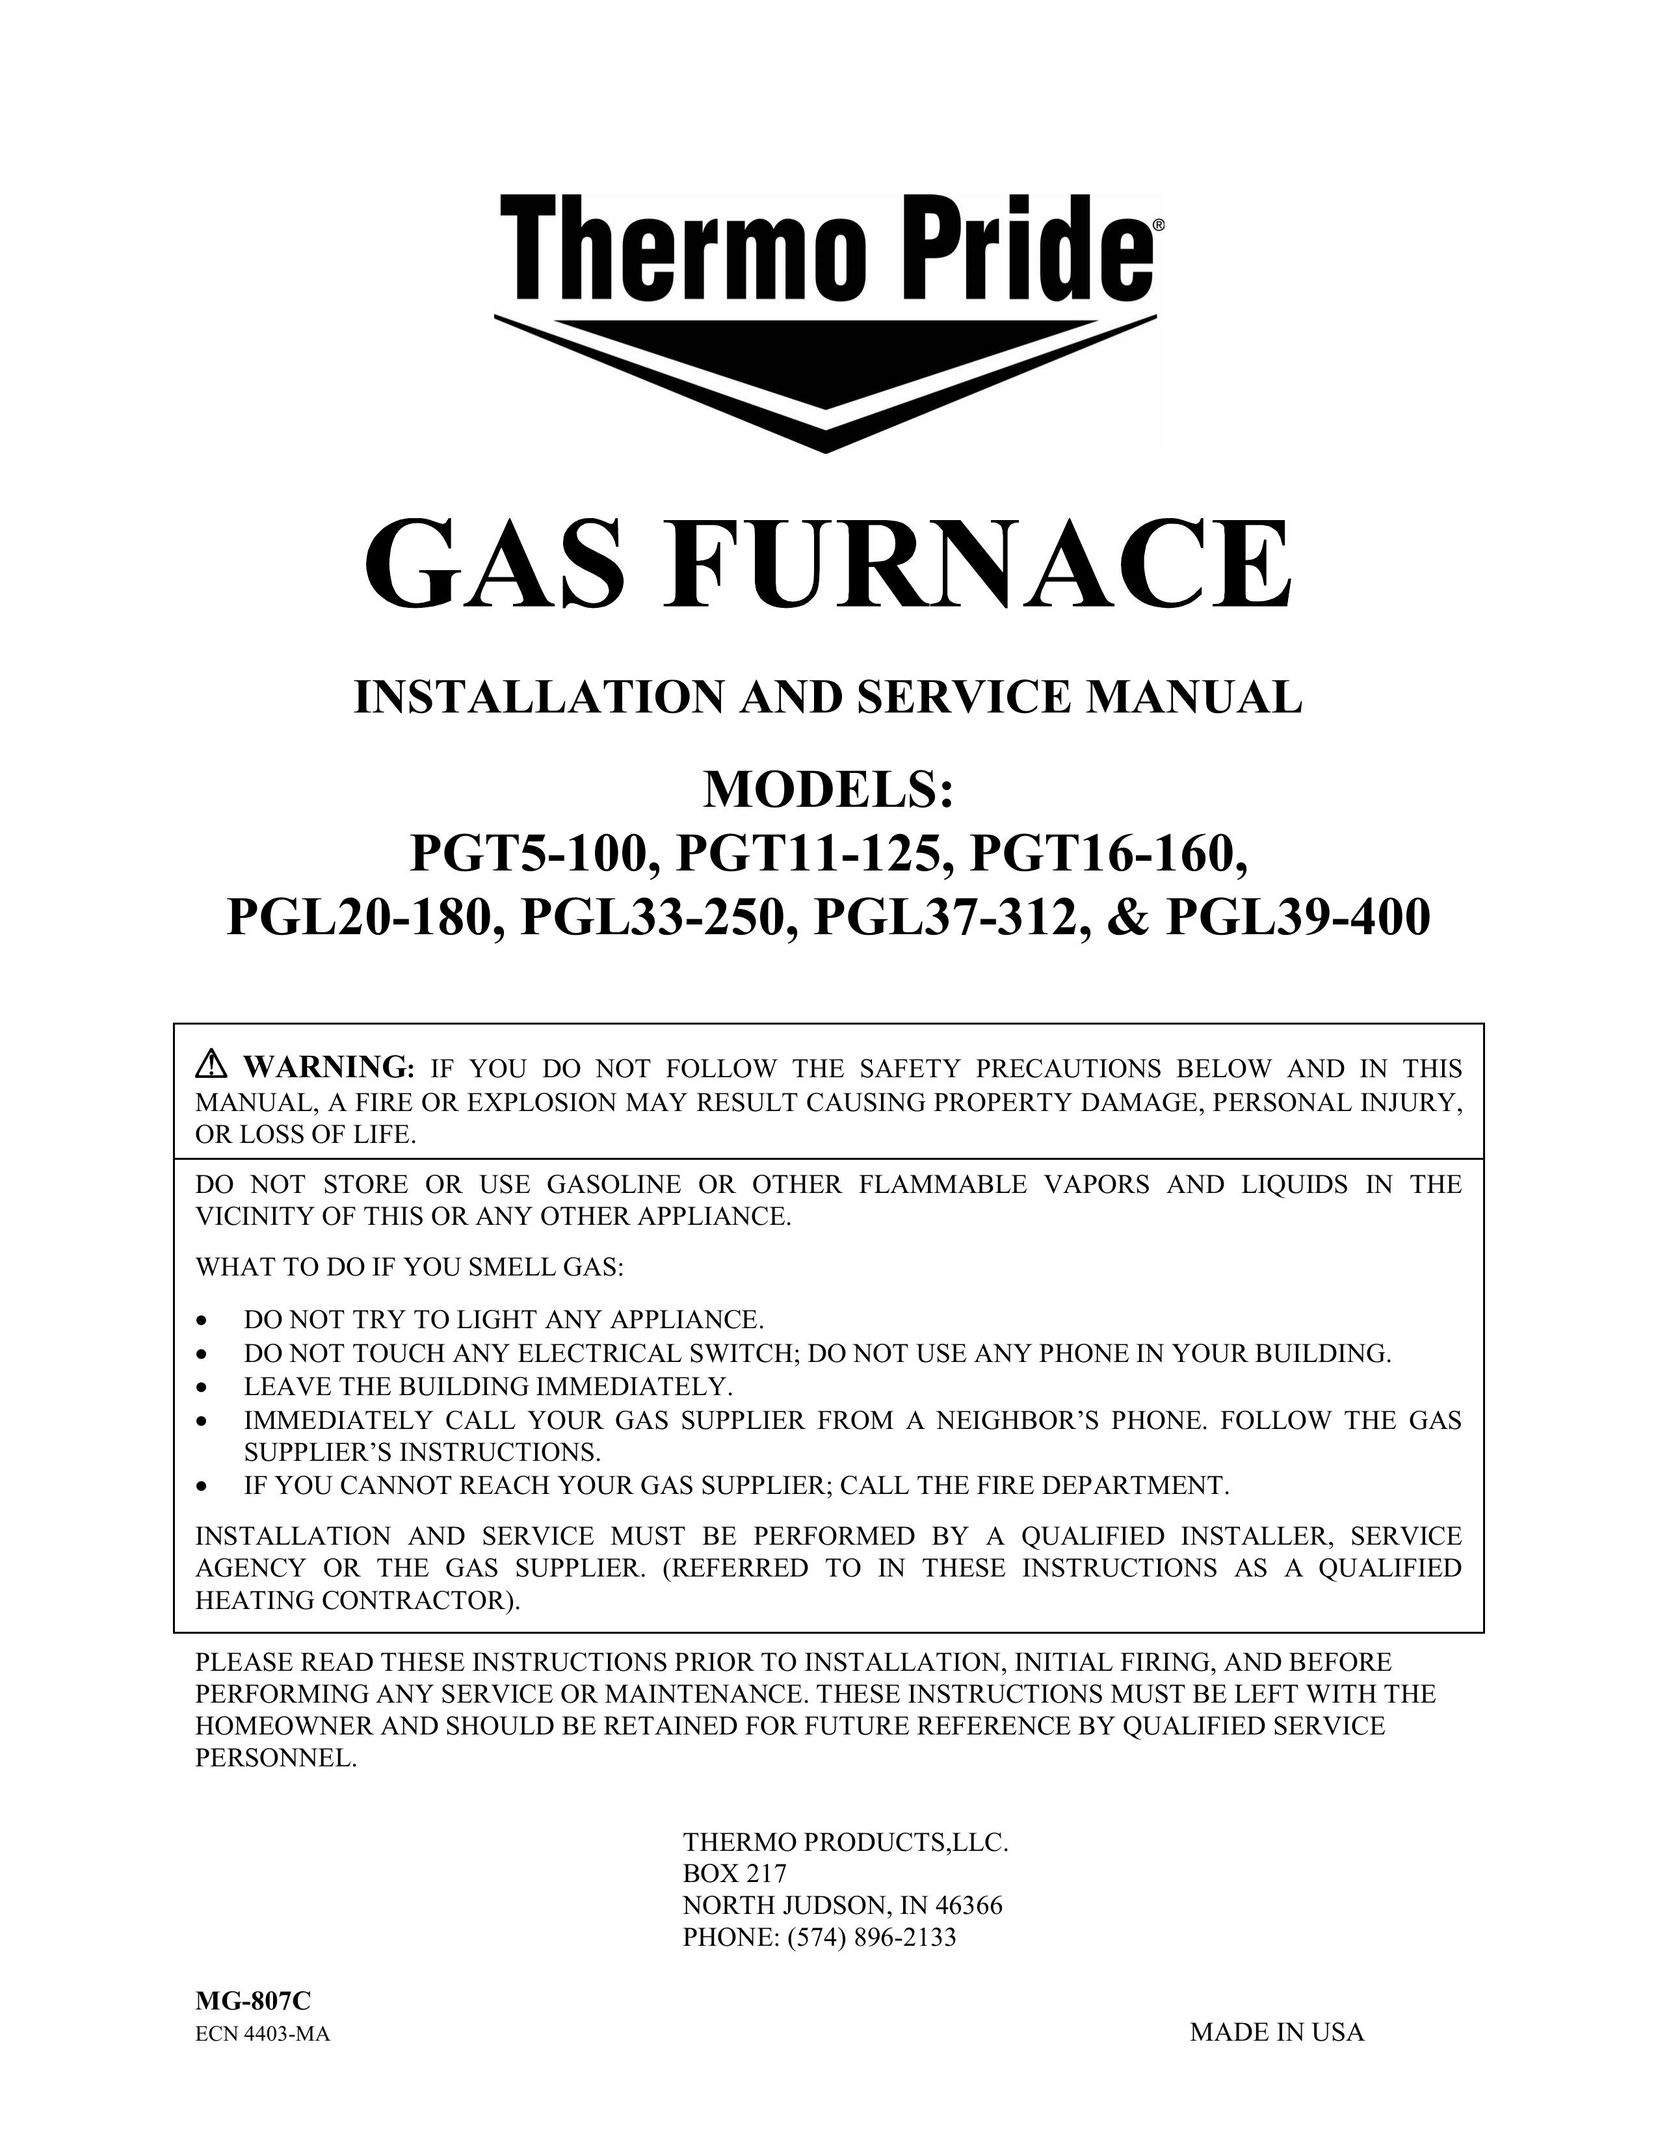 Thermo Products PGL39-400 Burner User Manual